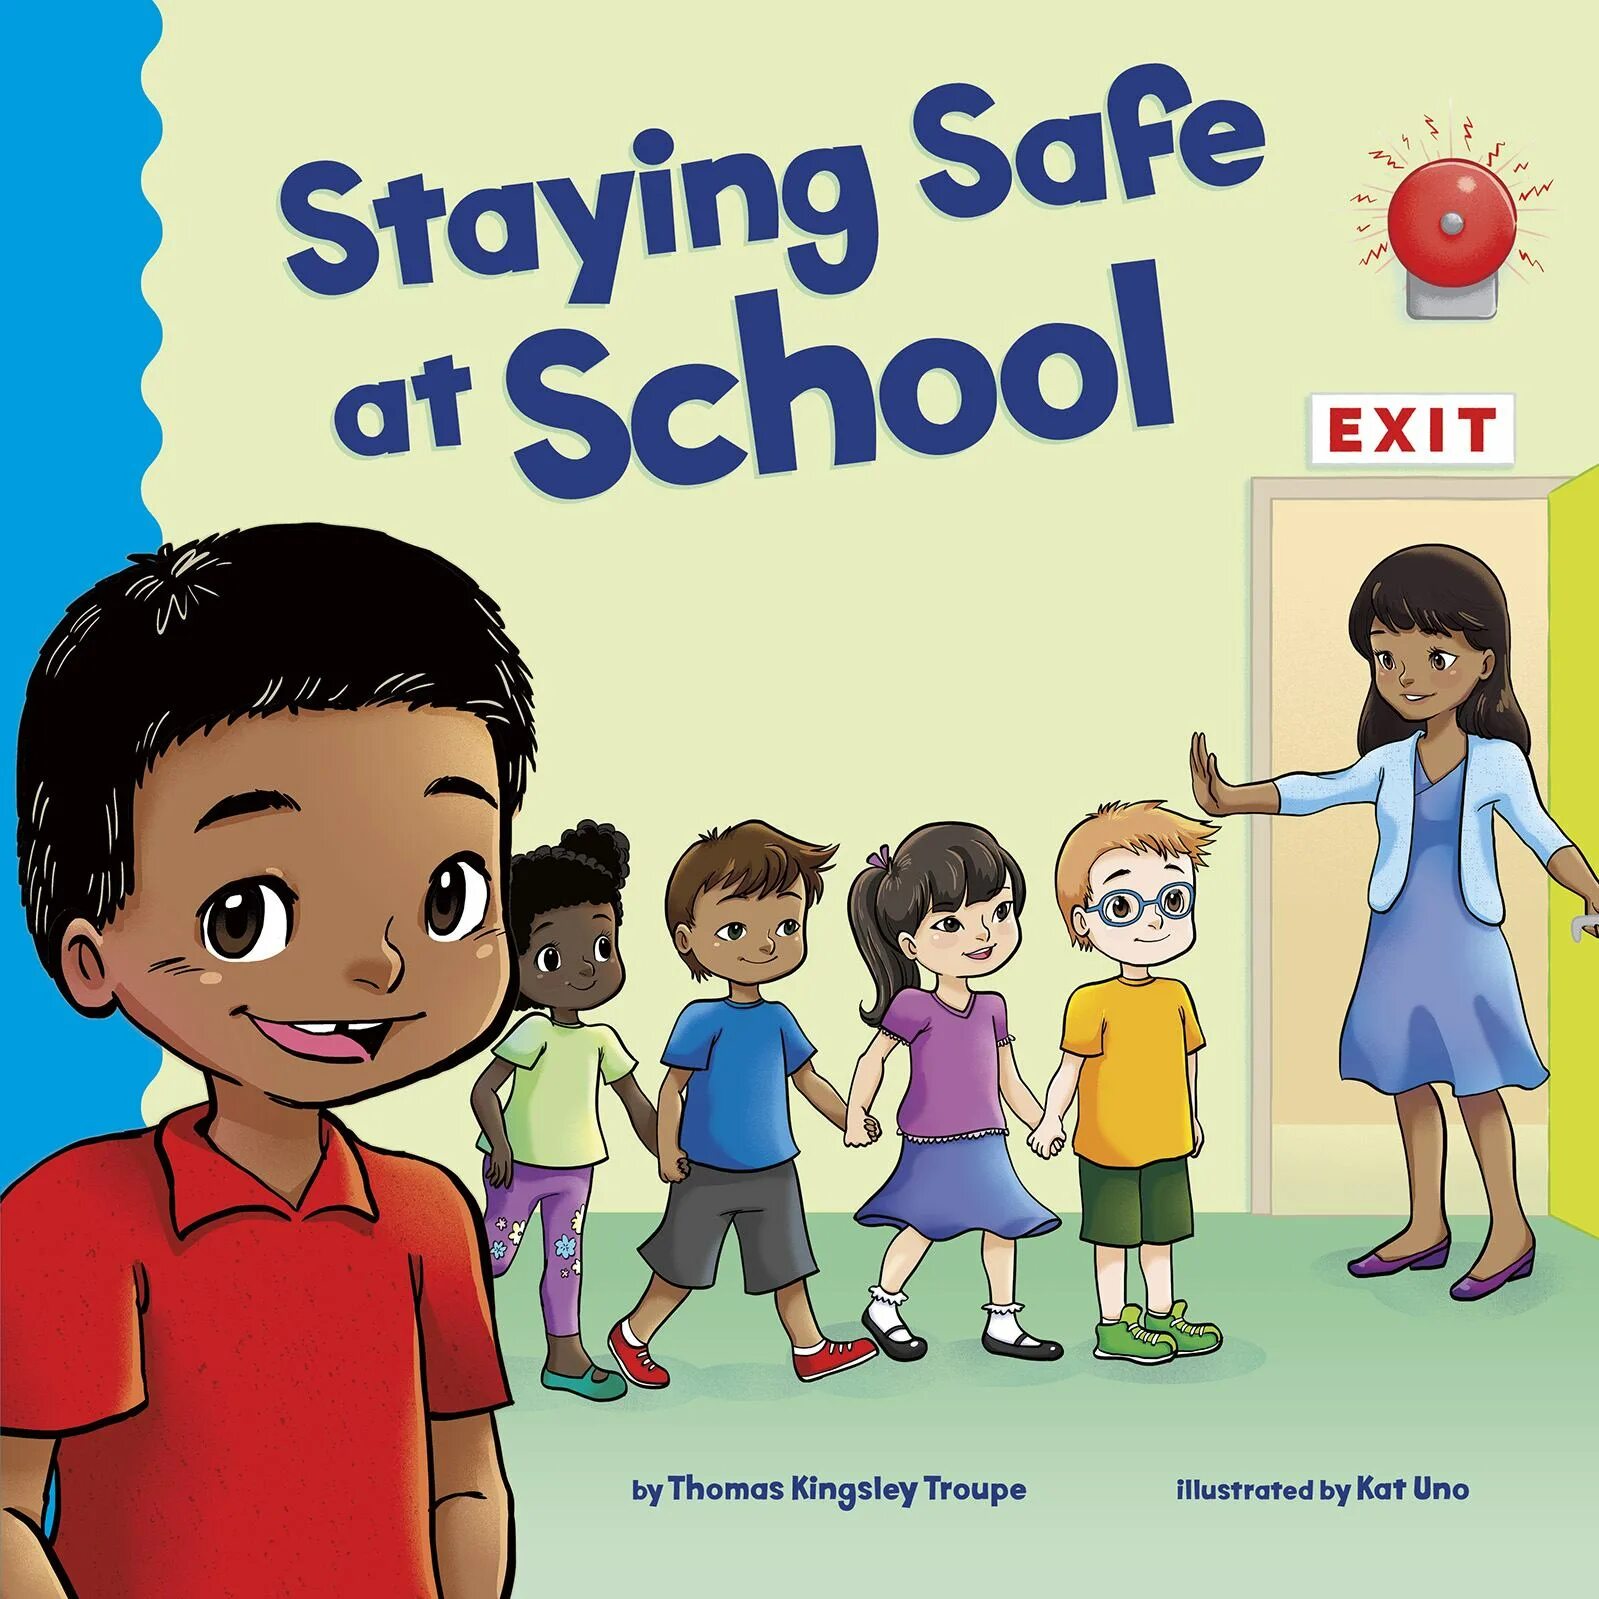 Safer school. Stay at School. Safe Rules at School. Staying safe. Safe School.